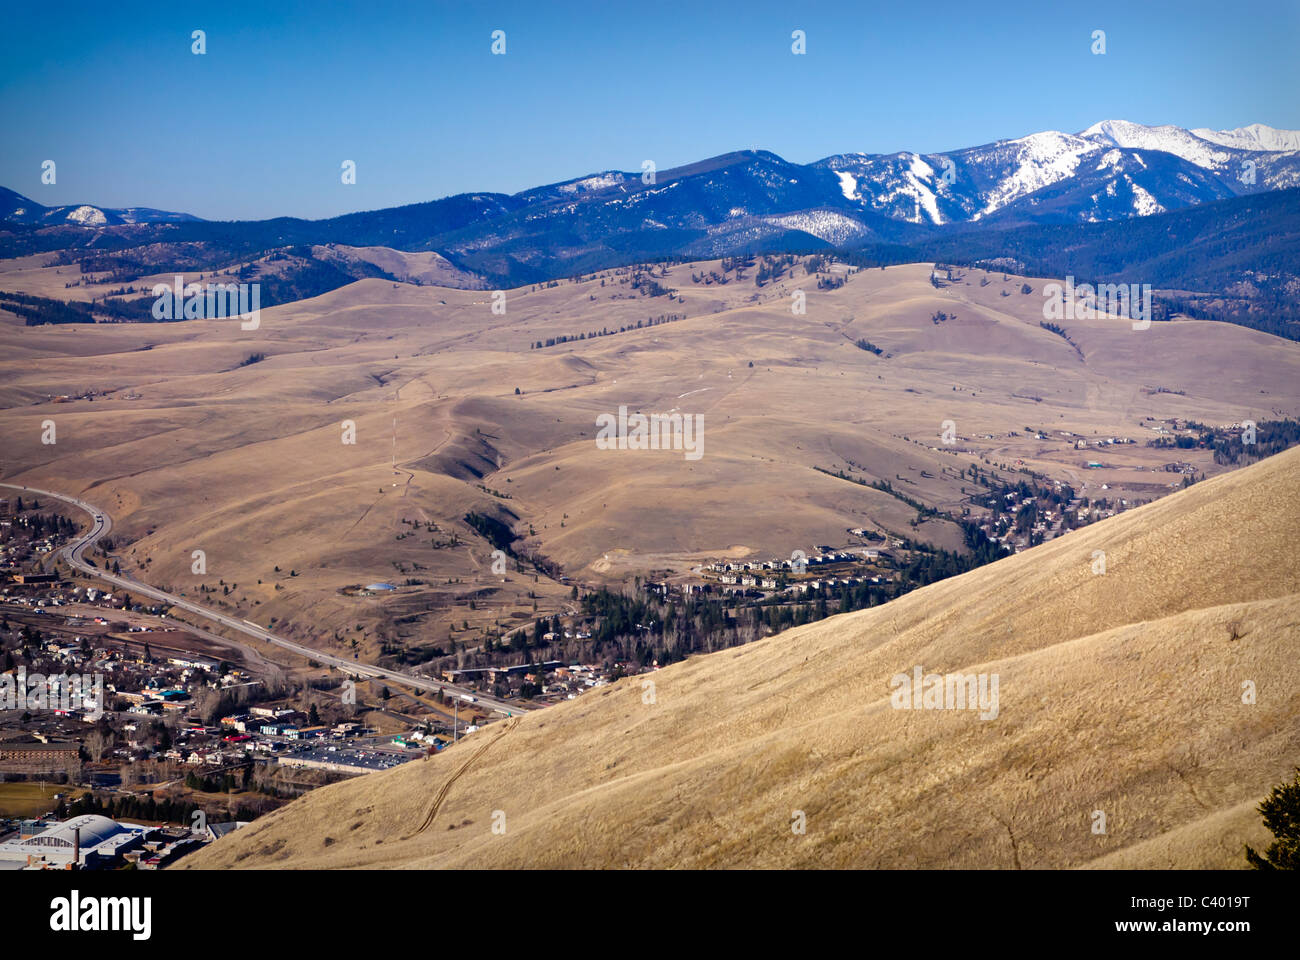 View of Missoula, Montana from Mount Sentinel. Missoula is often called the Garden City for its trees and green landscapes. Stock Photo